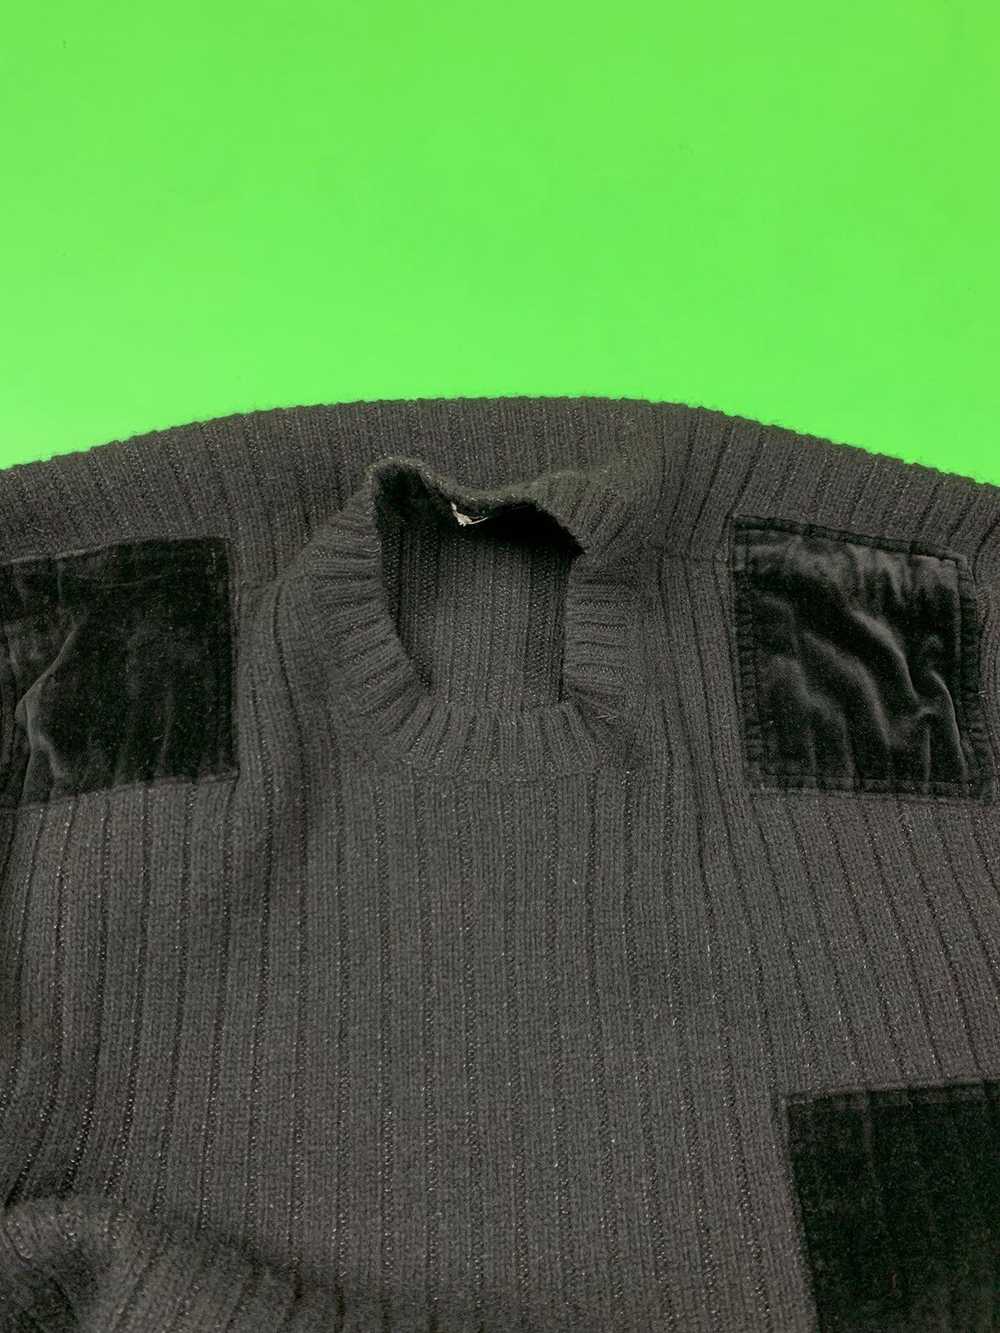 Helmut Lang AW 98 Archive Wool Knit Ribbed Milita… - image 7